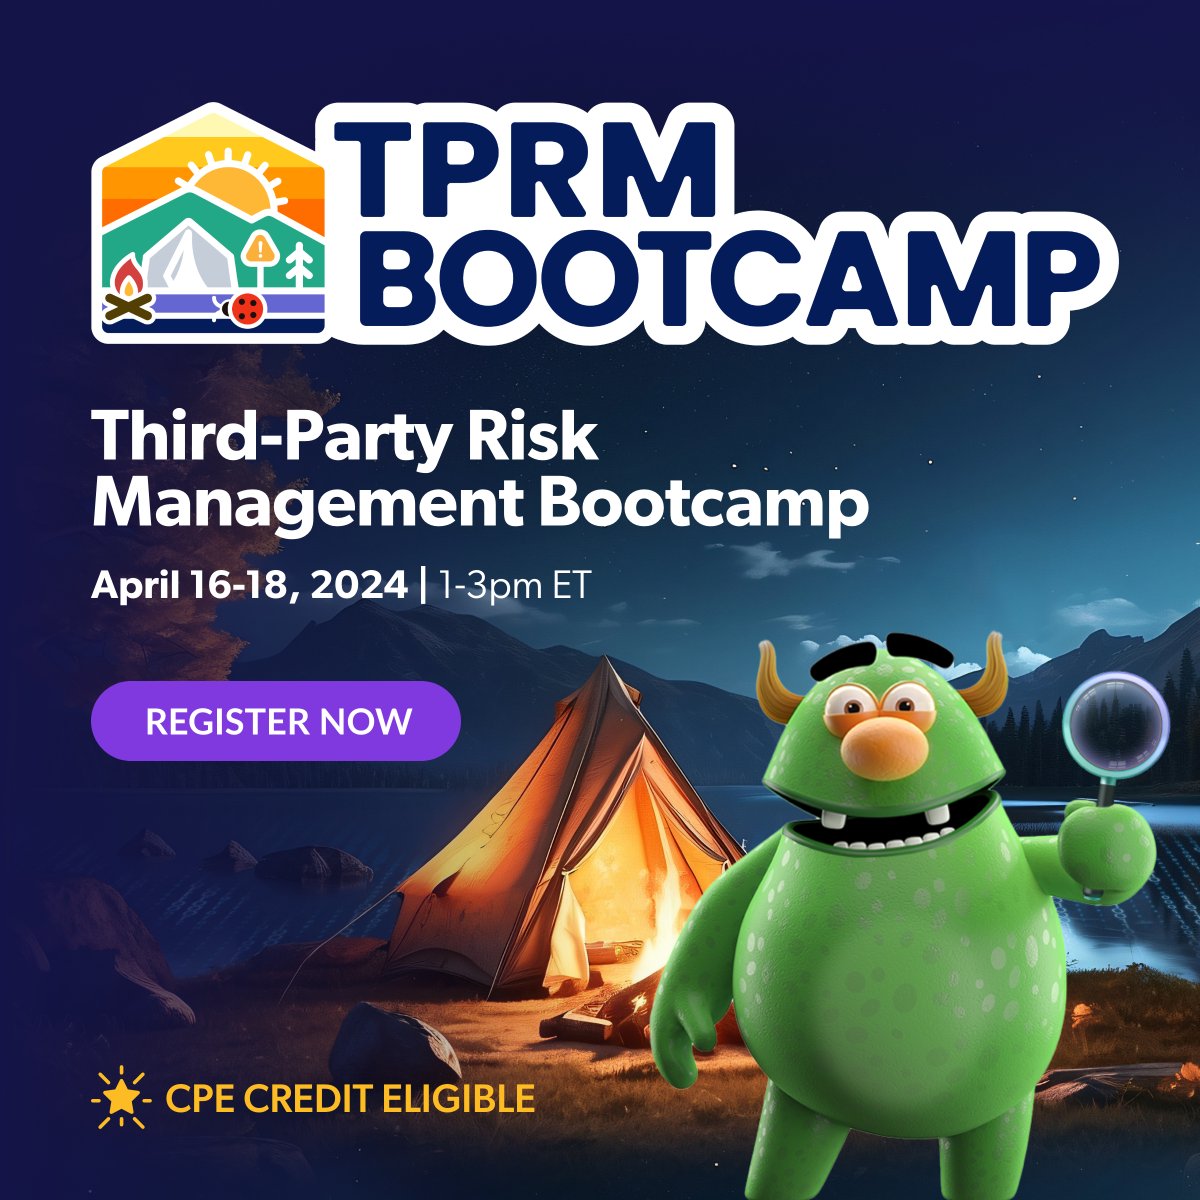 Are you attending this virtual third-party risk management bootcamp? It starts tomorrow! Don't miss out on 3 days packed with third-party risk management best practices, tips and solutions for common challenges, and more! Register now: hubs.ly/Q02sVHjX0 #vendormanagement